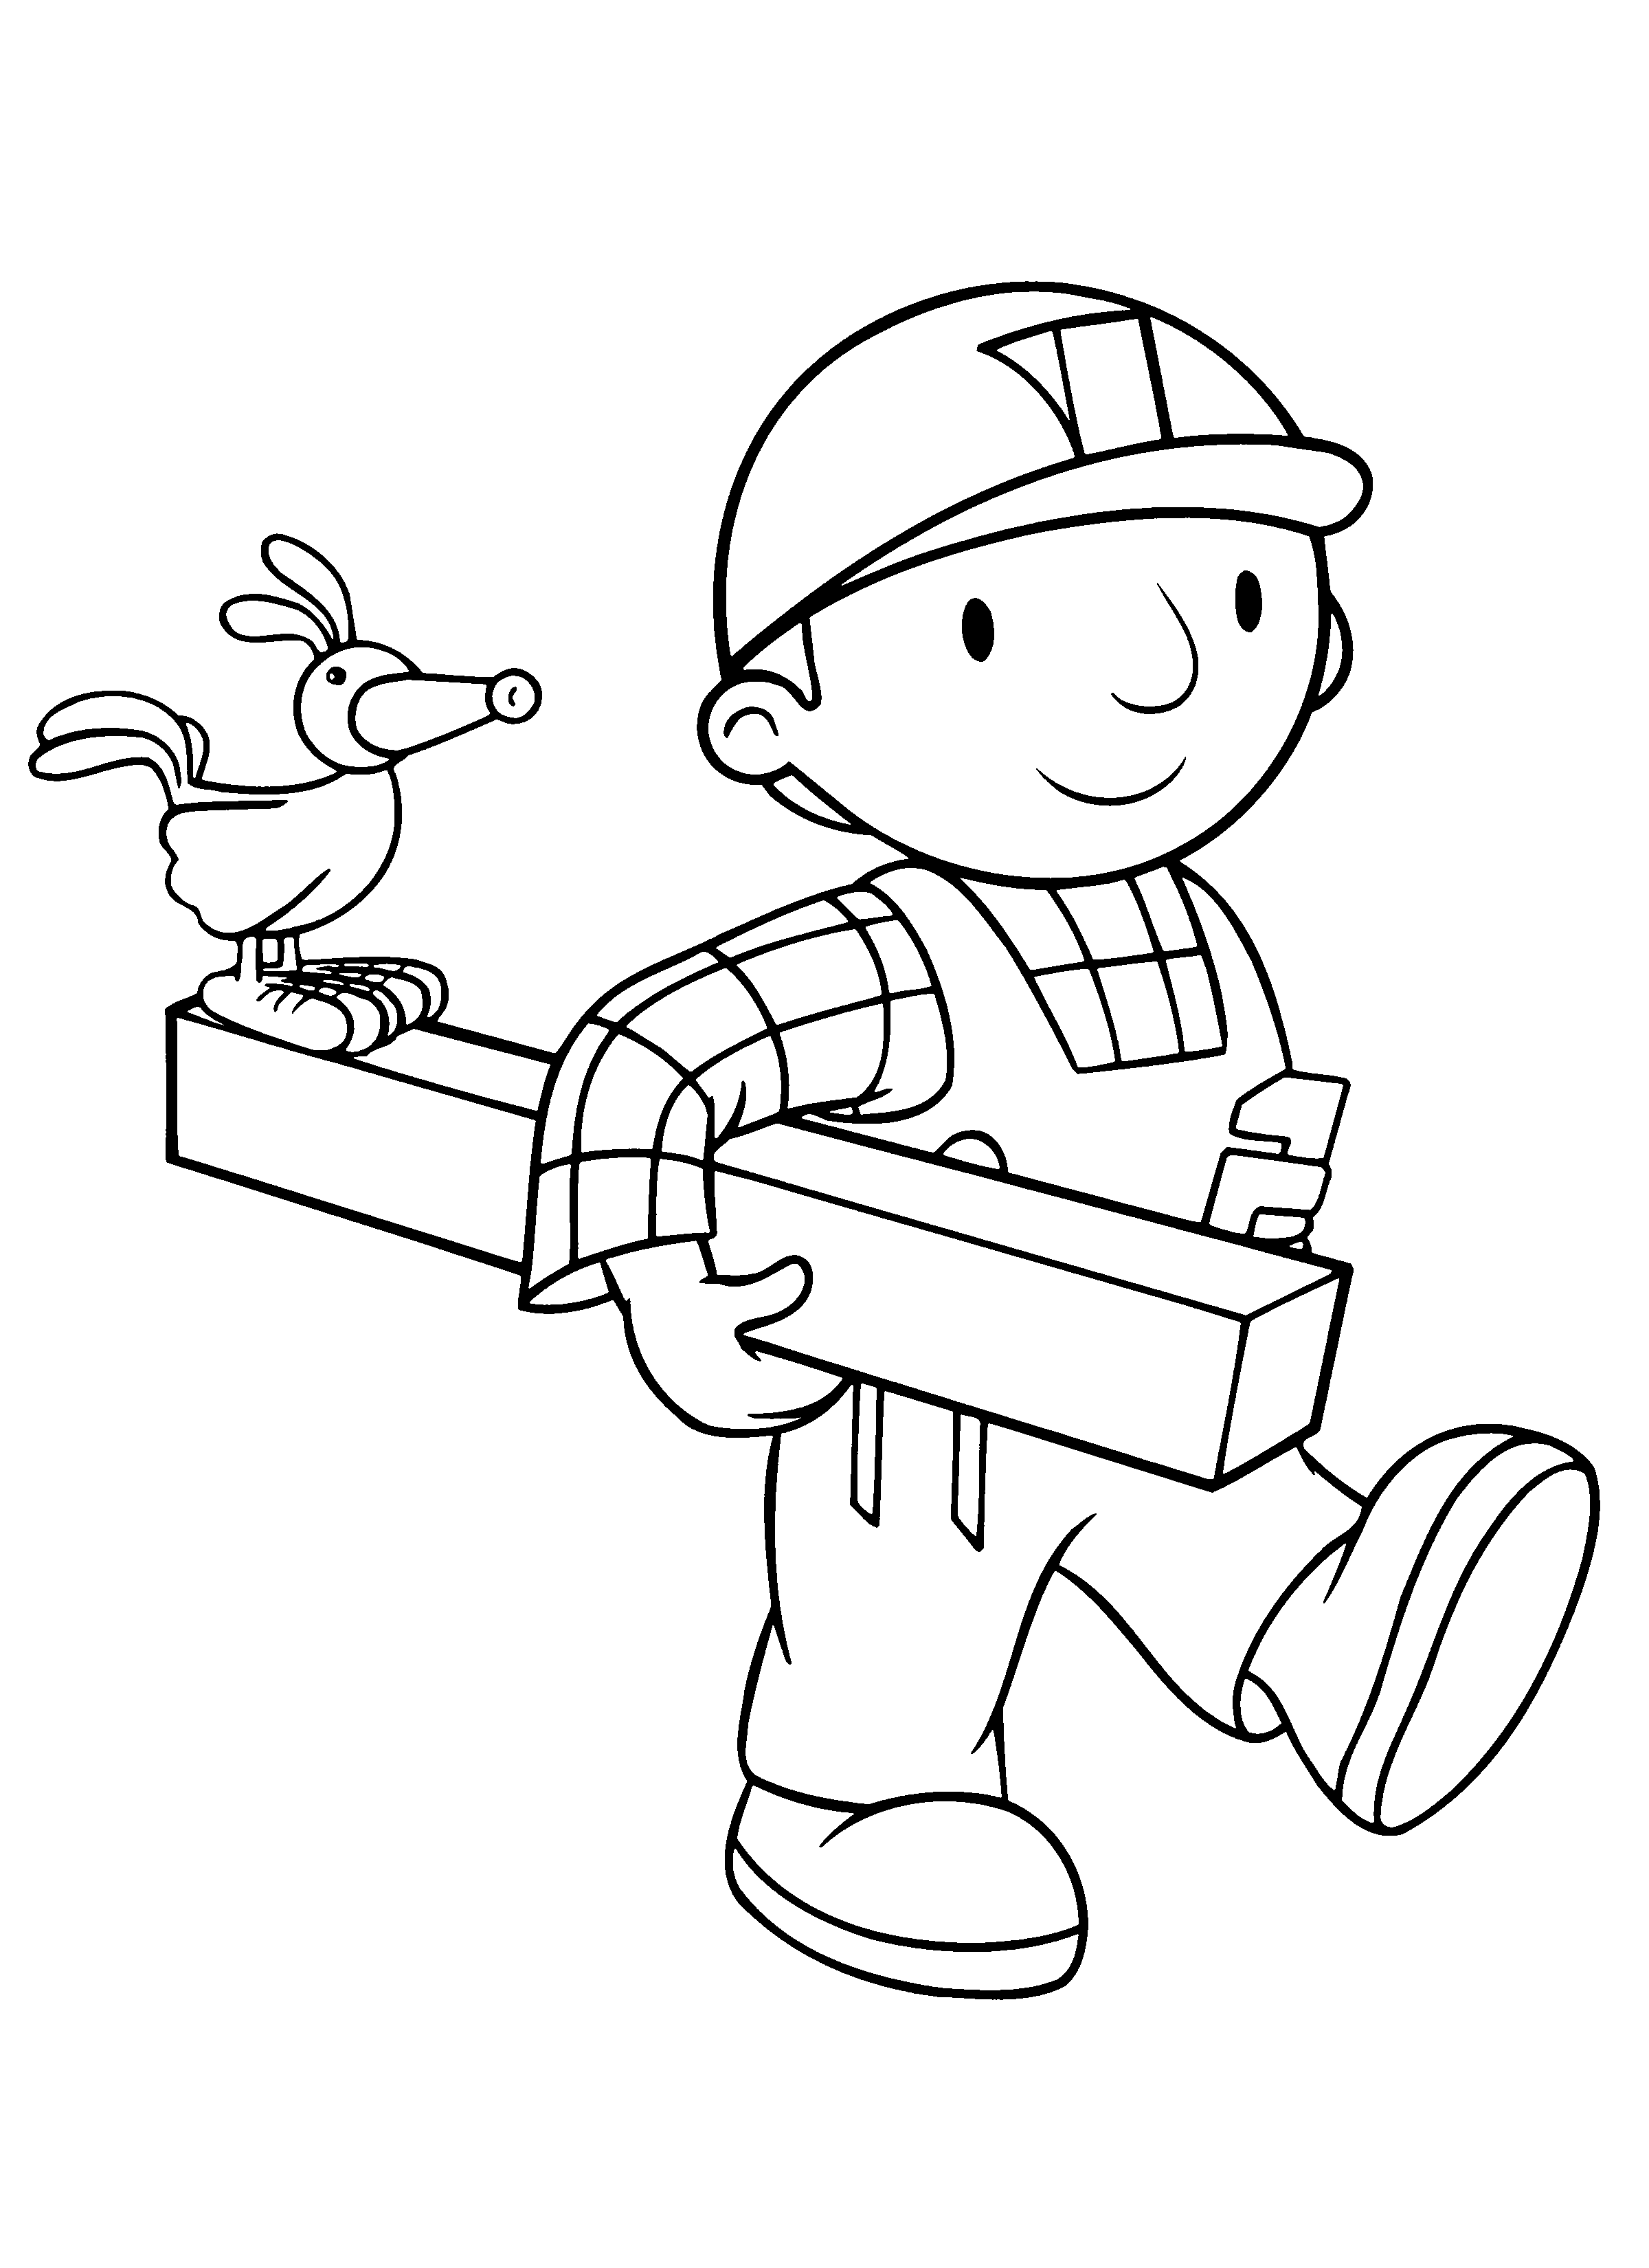 Bob the builder for children - Bob The Builder Kids Coloring Pages